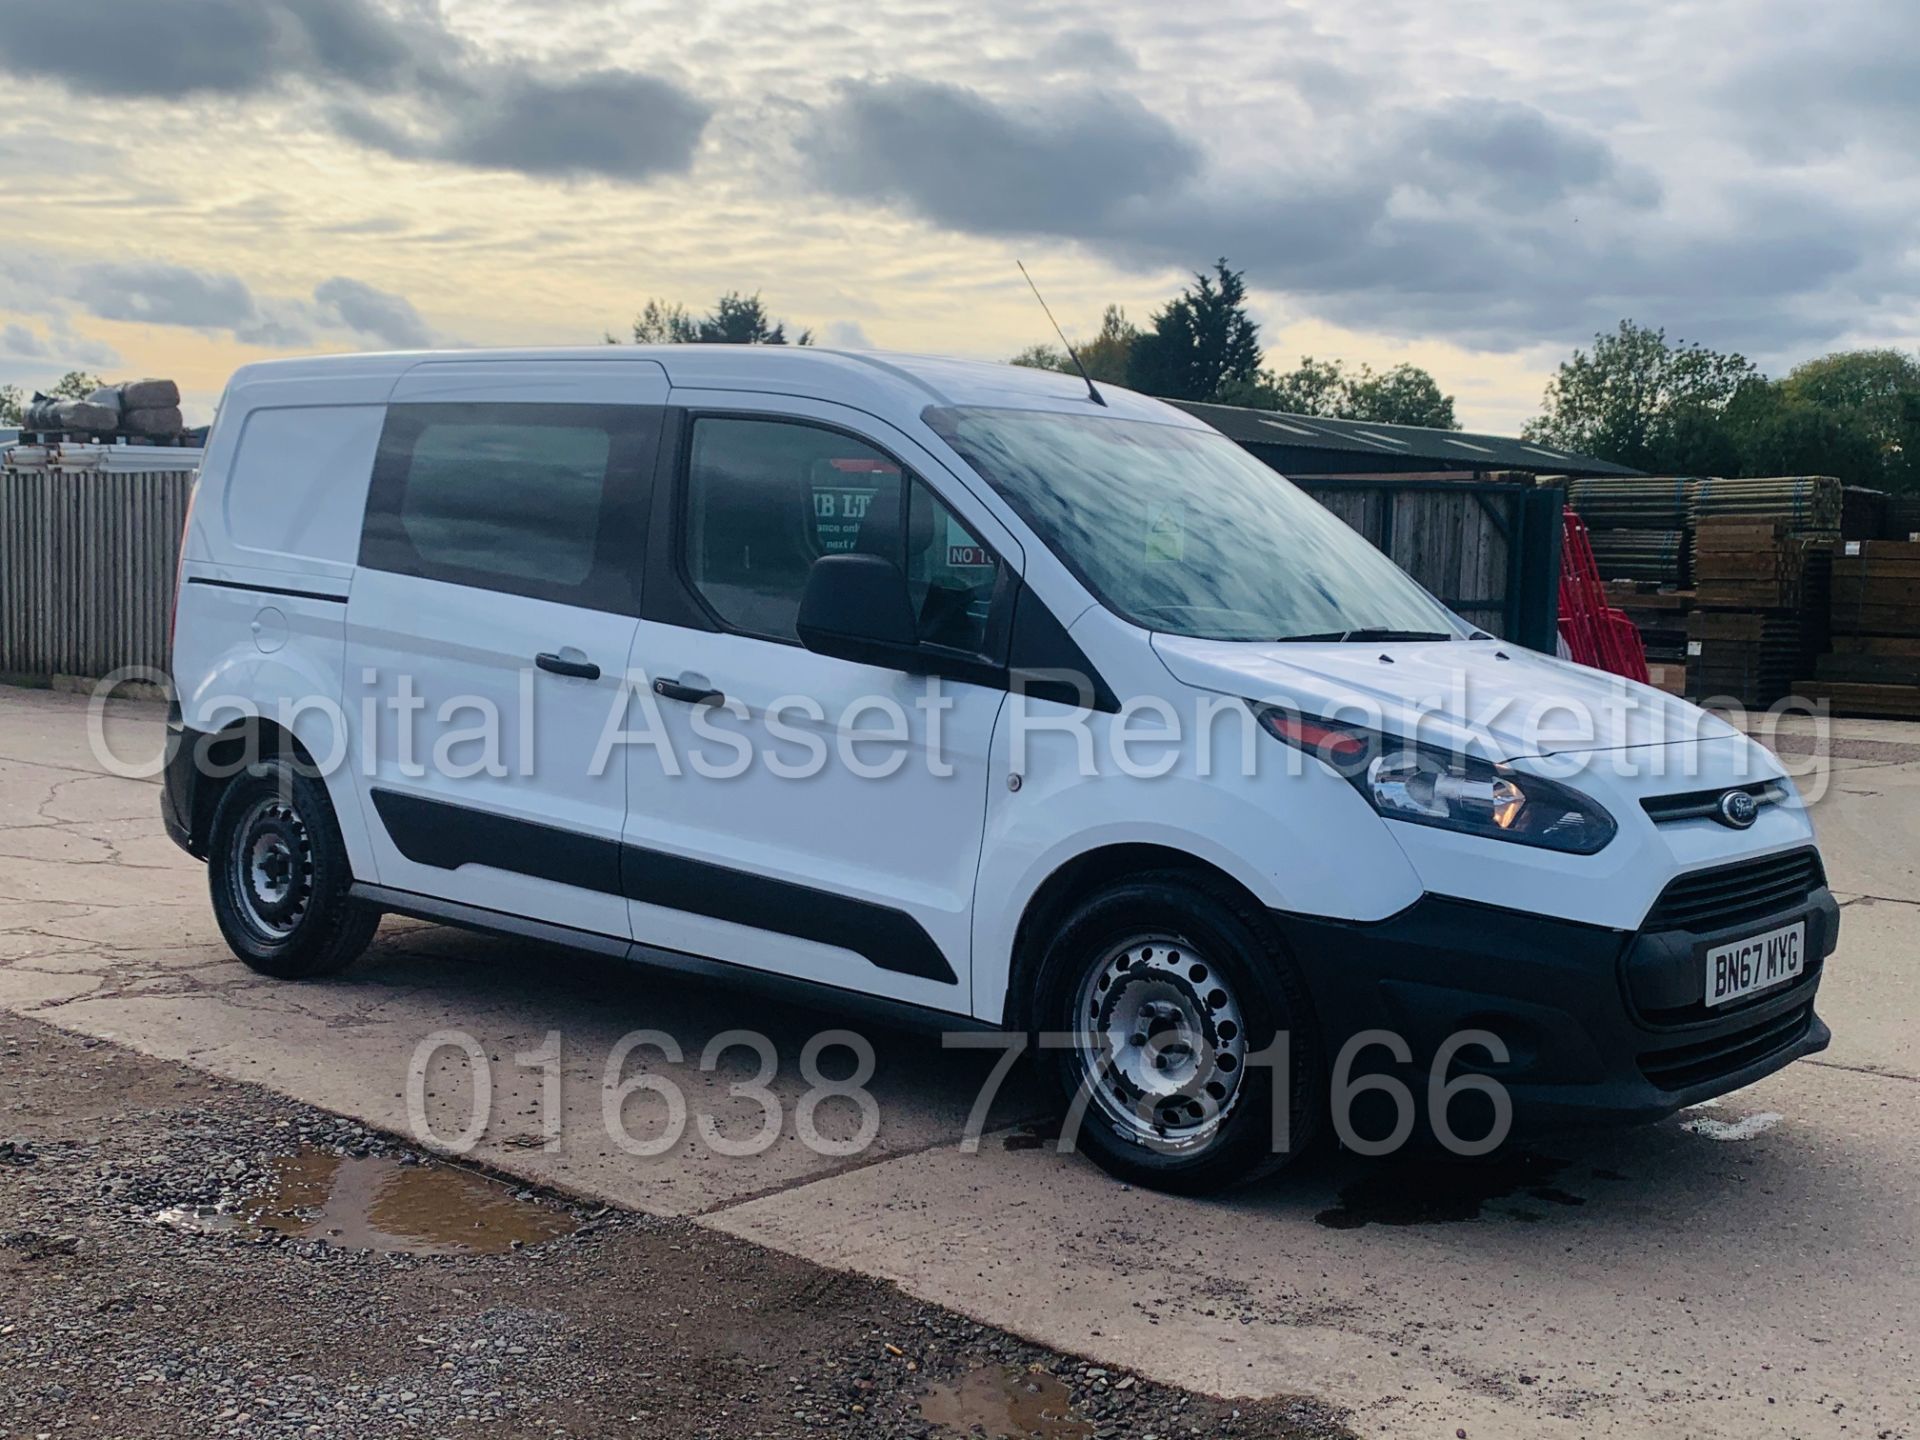 (On Sale) FORD TRANSIT CONNECT *LWB - 5 SEATER CREW VAN* (67 REG - EURO 6) 1.5 TDCI *A/C* (1 OWNER)